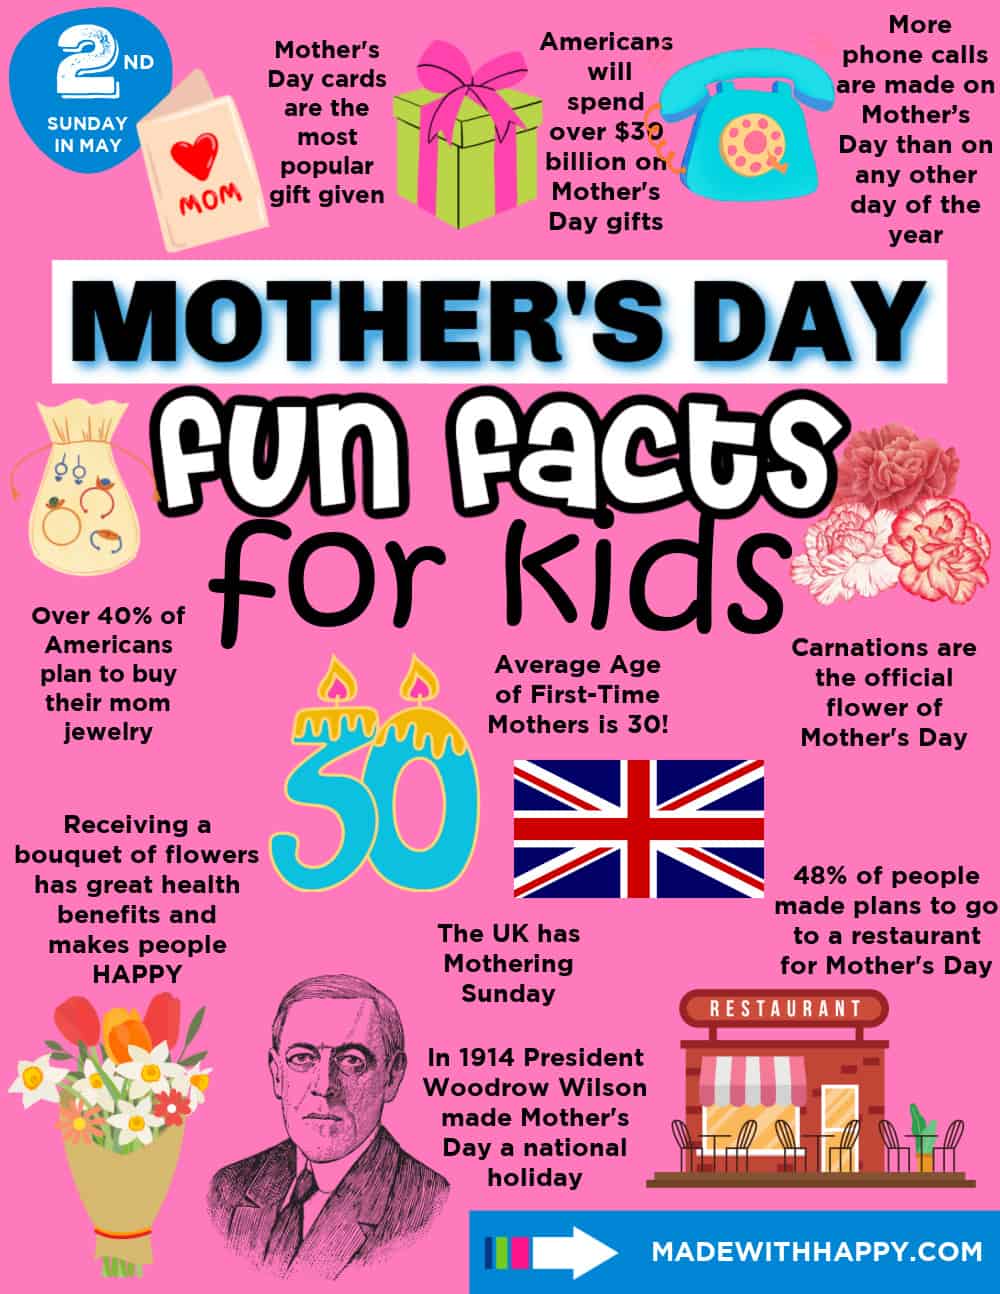 fun facts about mother's day